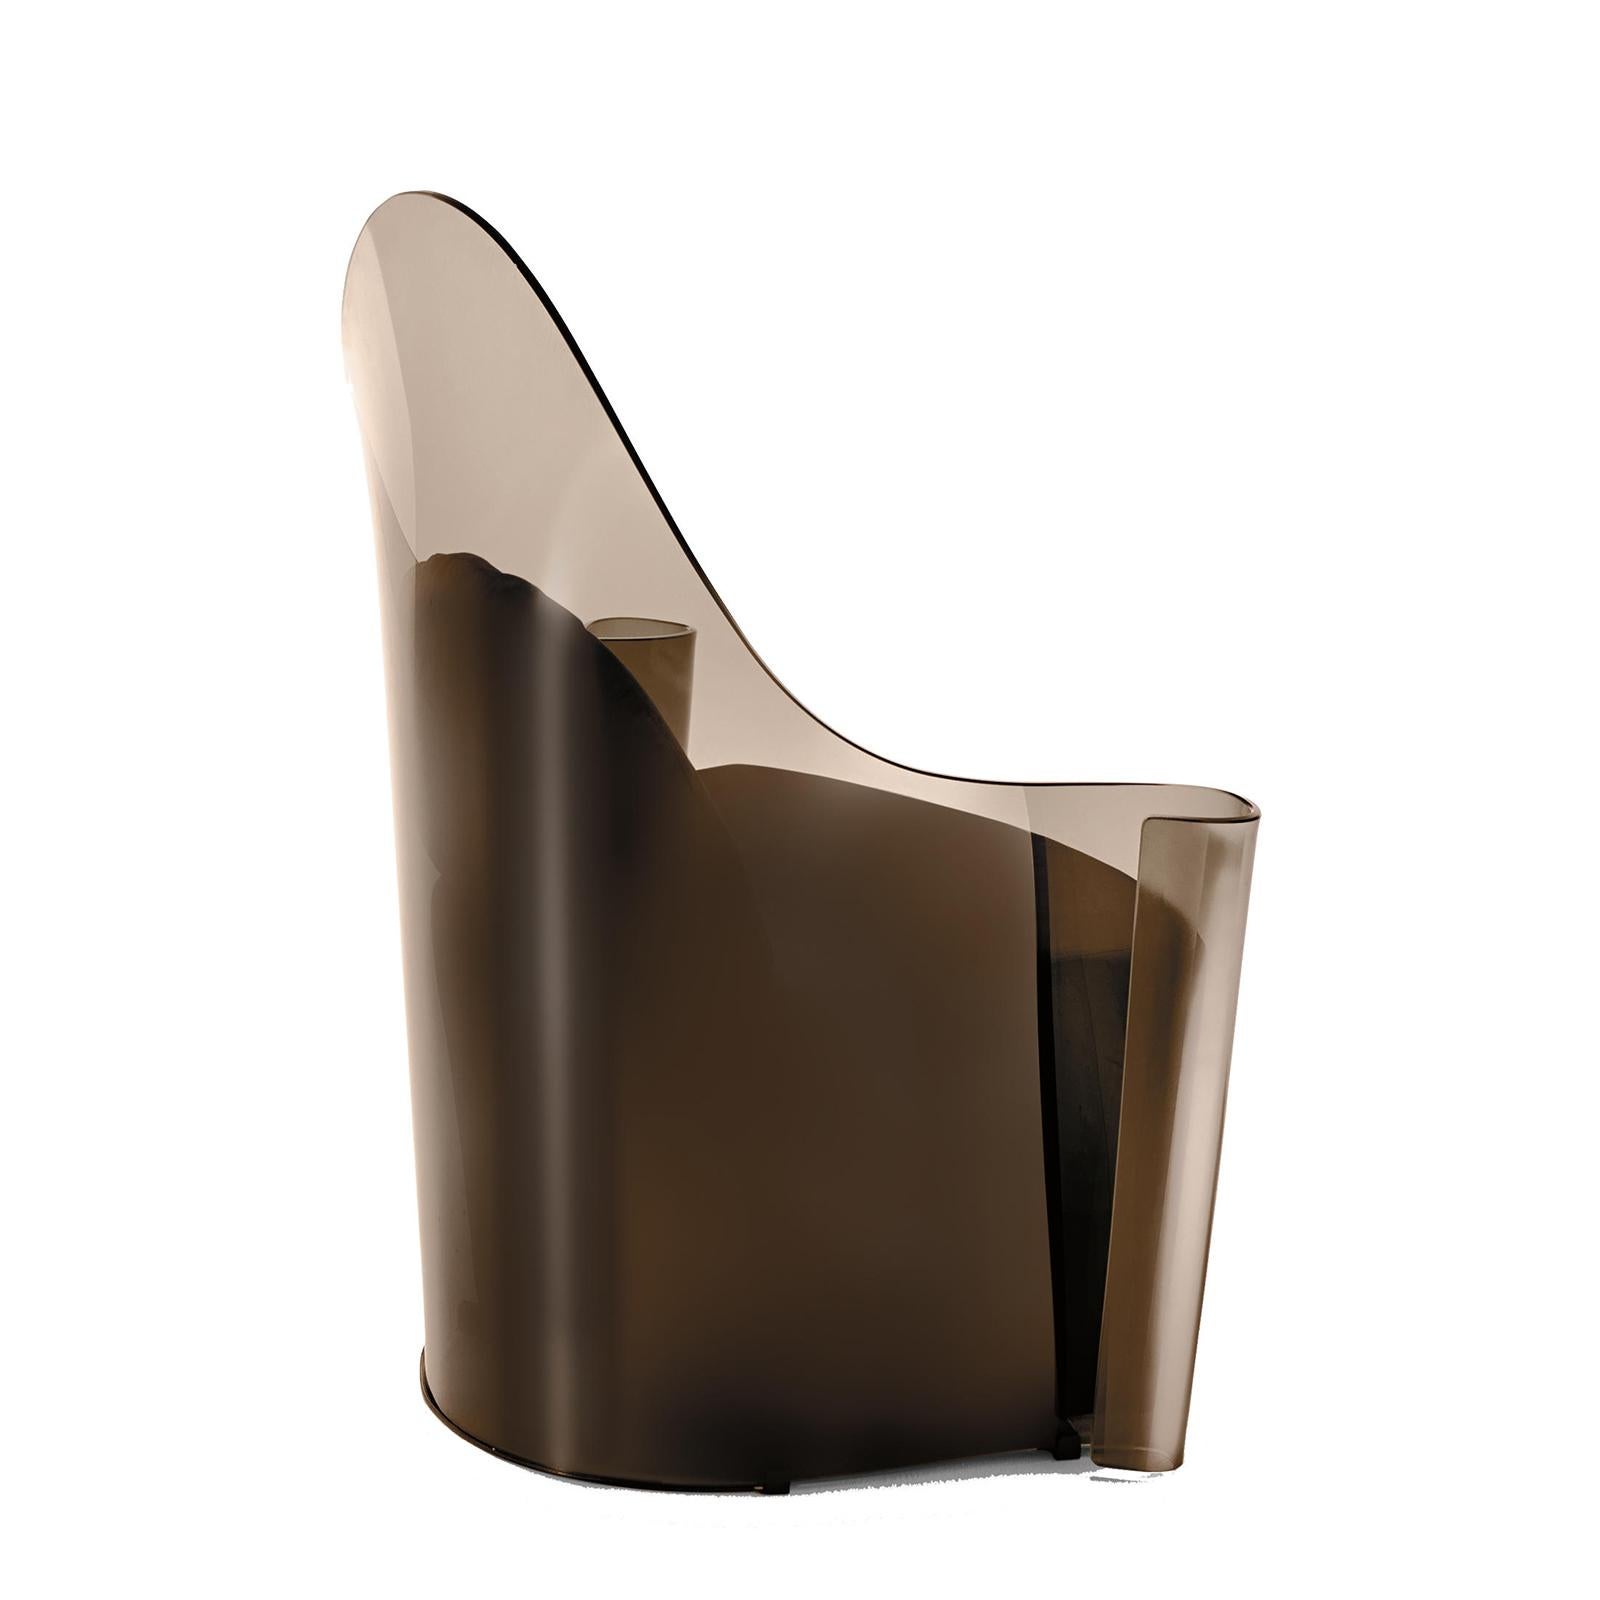 Armchair Madona made with curved smoked glass
10mm thickness in bronze finish. With upholstered
seat covered with black velvet fabric. With cushion included.
Also available in black smoked finish.